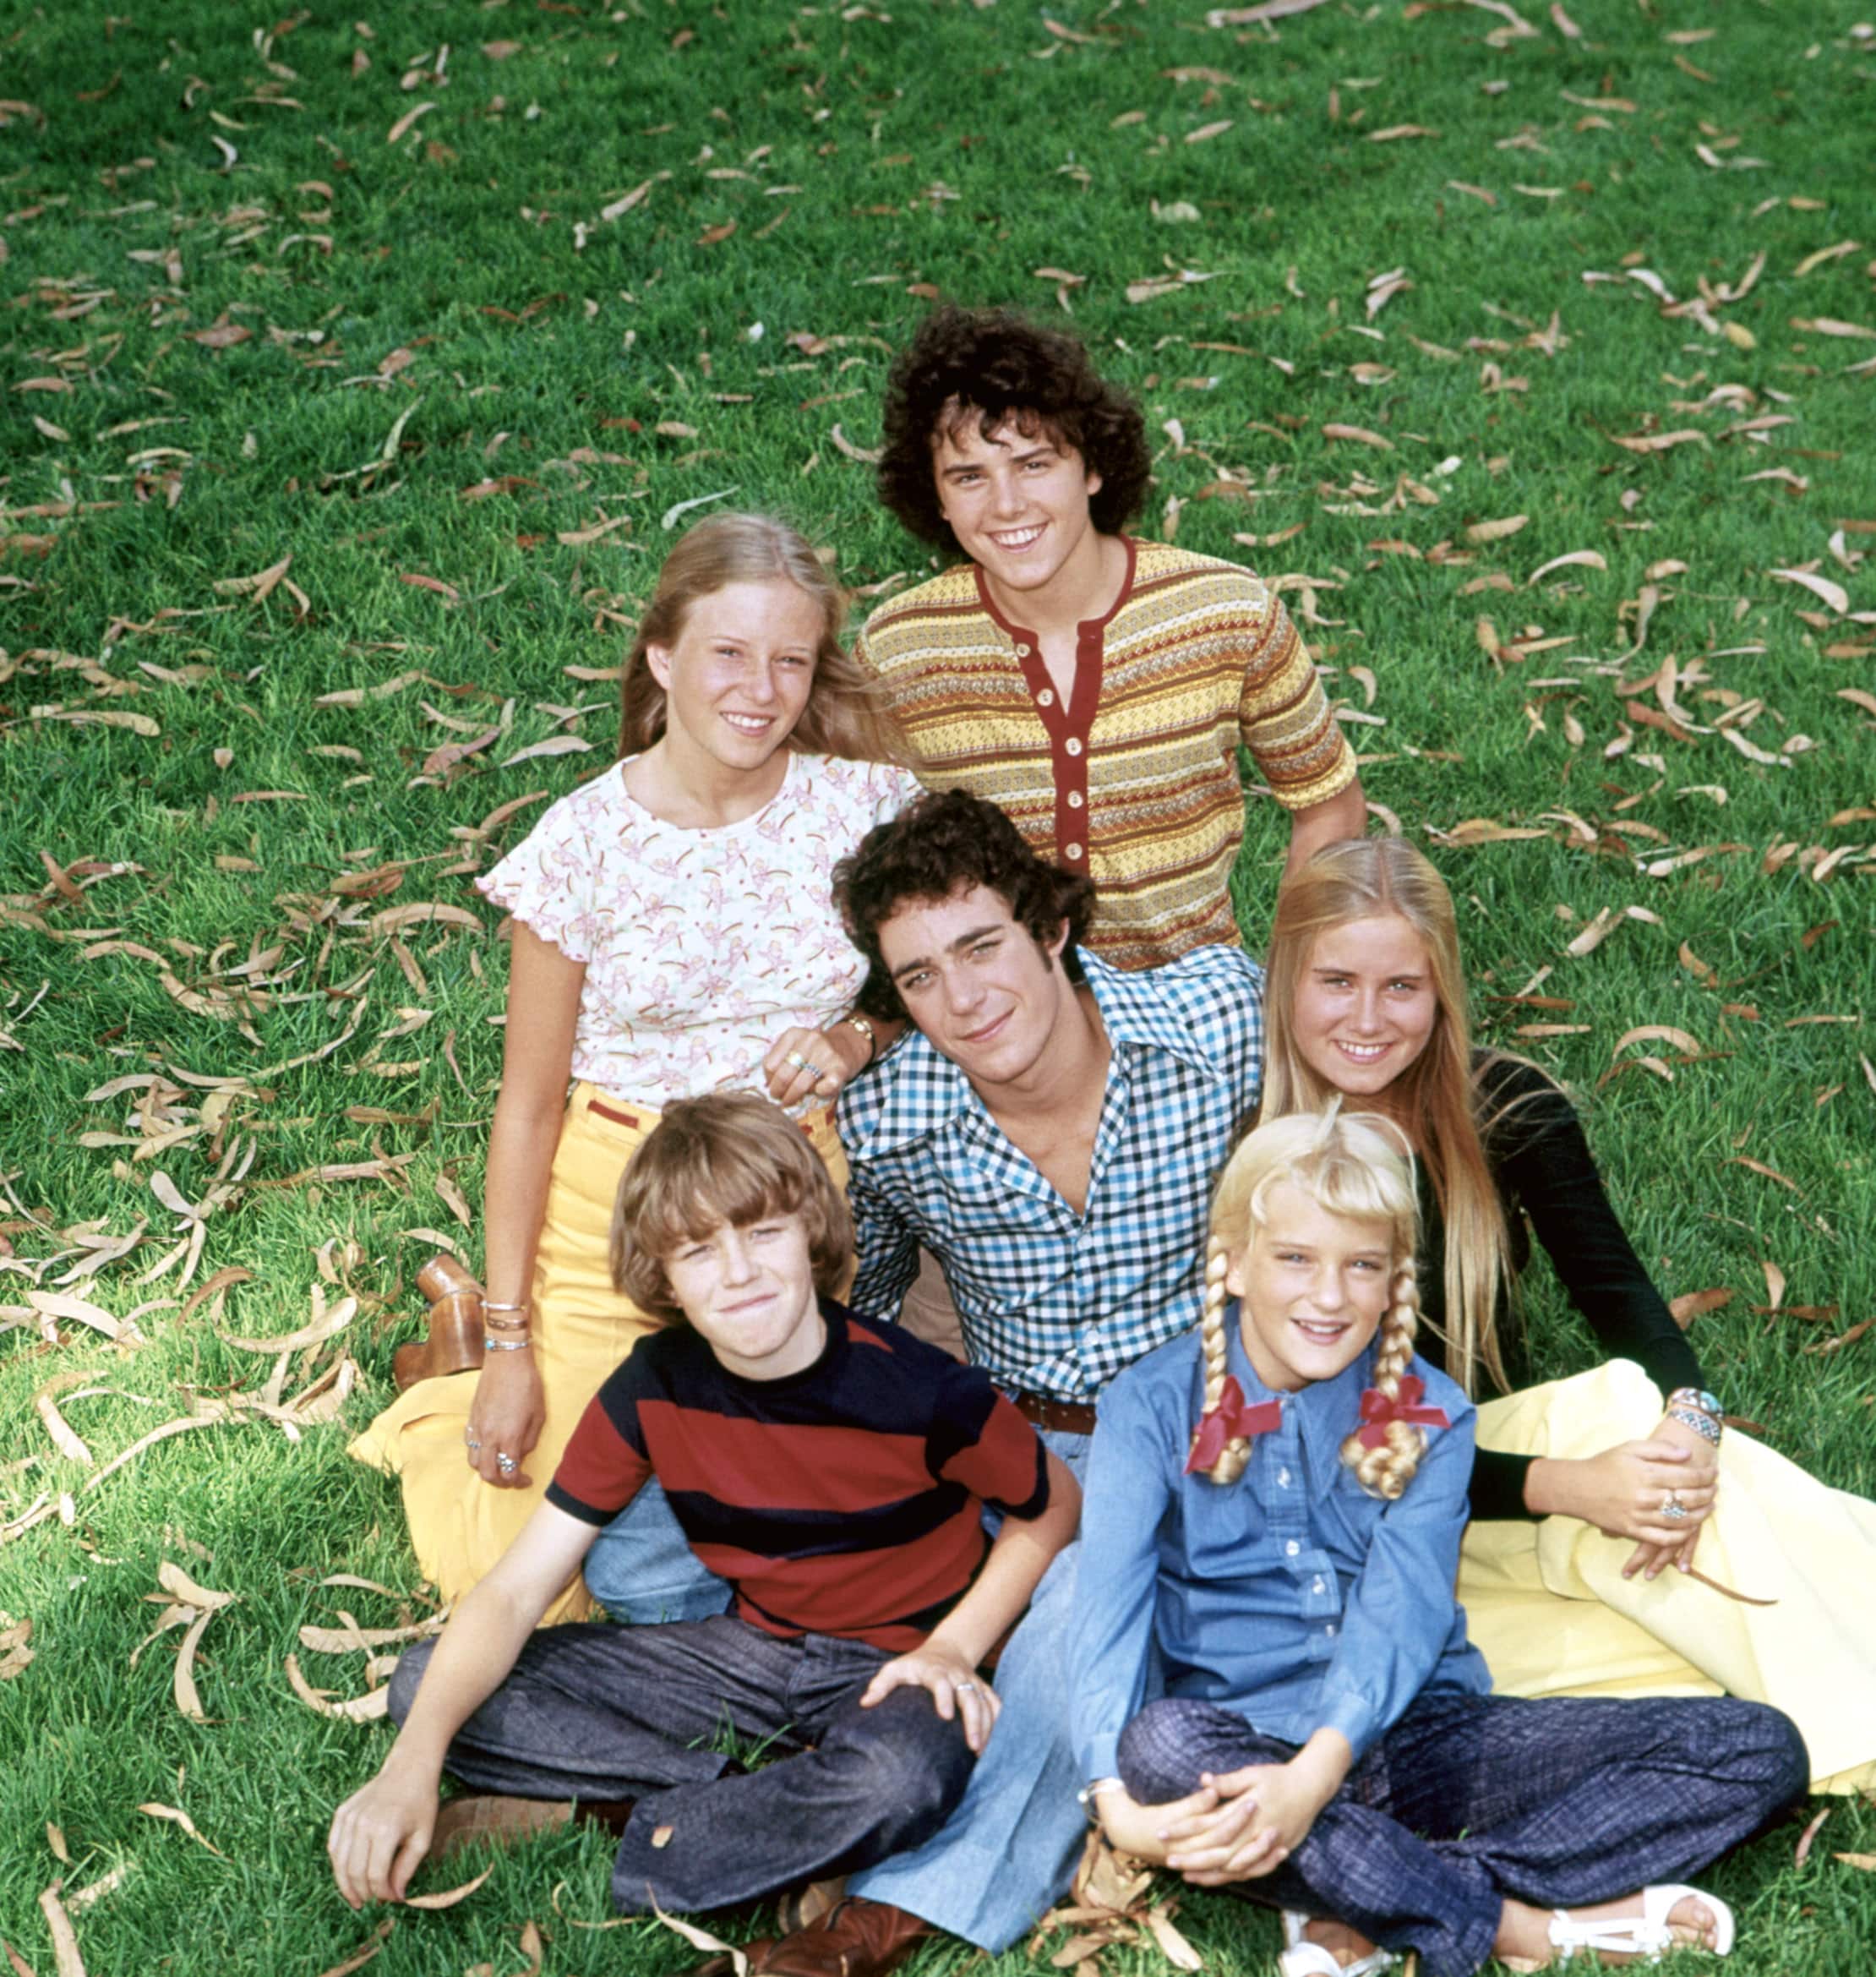 THE BRADY BUNCH, (clockwise from top): Christopher Knight, Maureen McCormick, Susan Olsen, Mike Lookinland, Eve Plumb, Barry Williams (center), 1969-74 